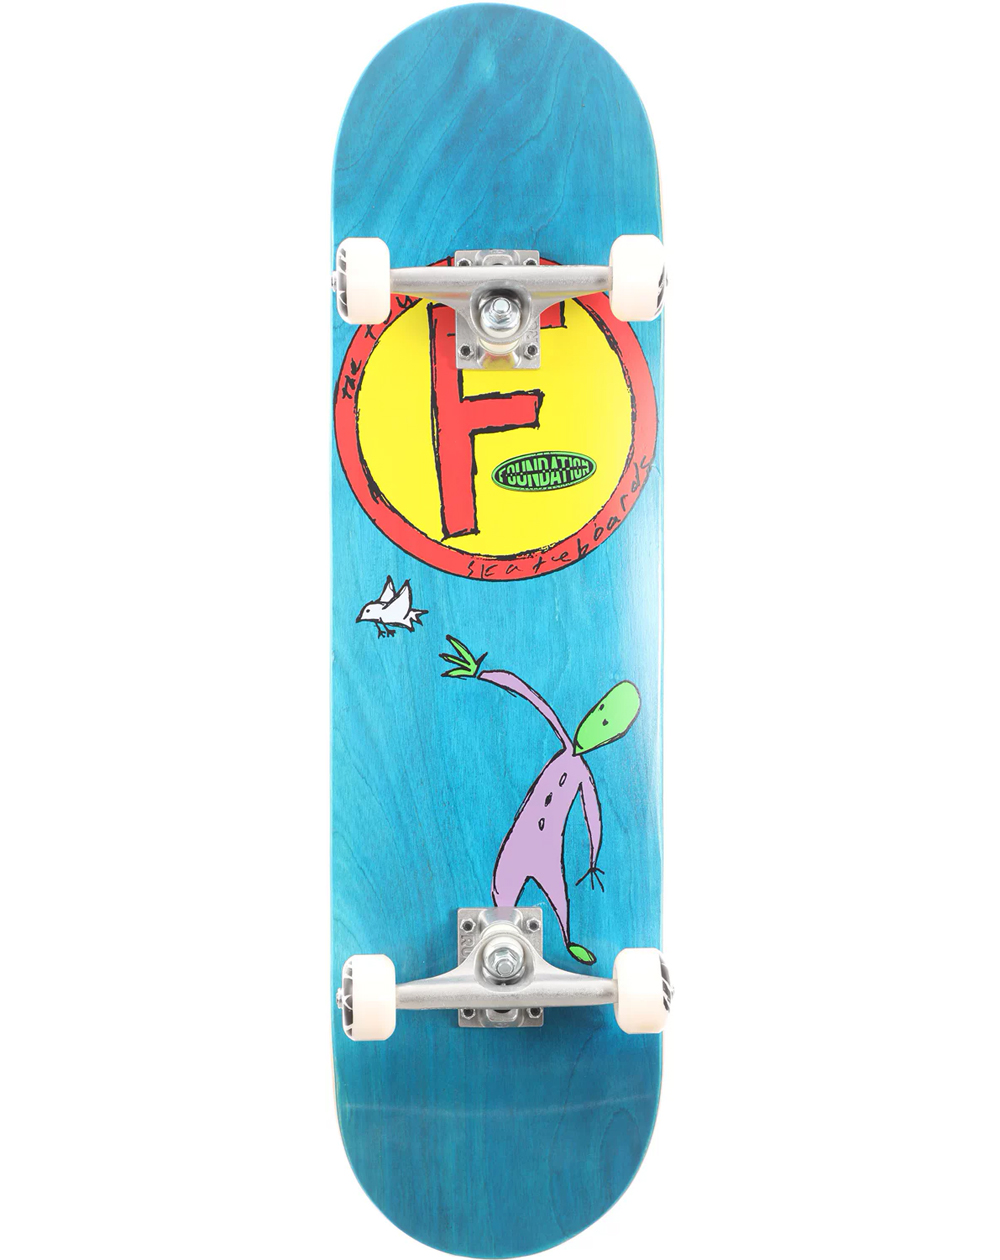 Foundation Circle F Bird 8.5" Complete Skateboard Turquoise